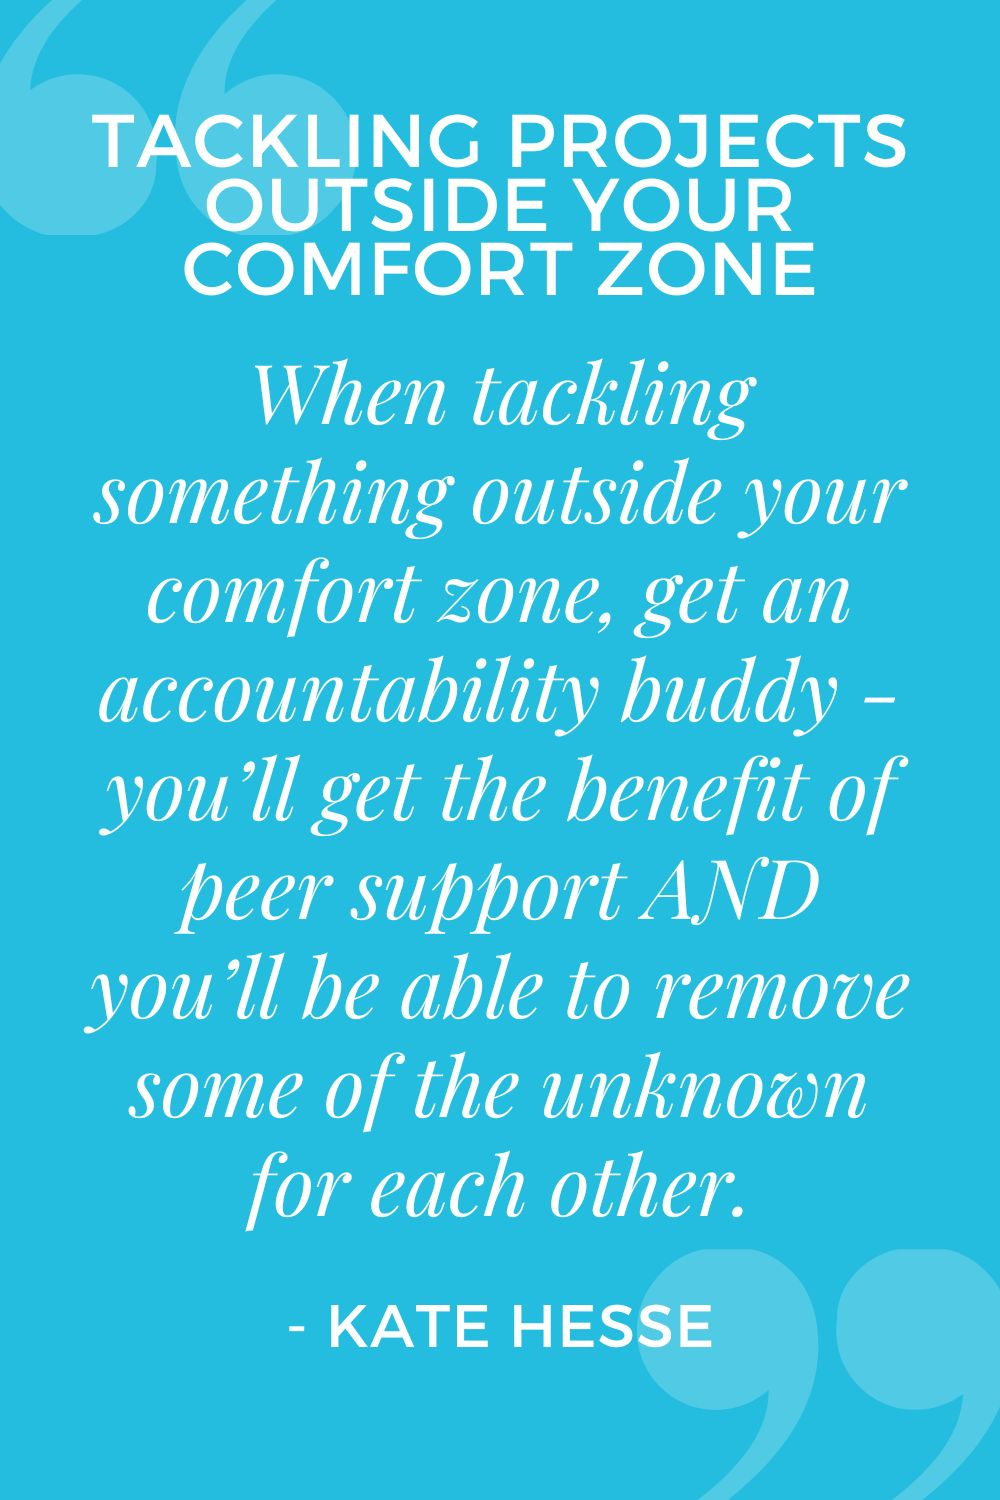 When tackling something outside your comfort zone, get an accountability buddy - you'll get the benefit of peer support AND you'll be able to remove some of the unknown for each other.